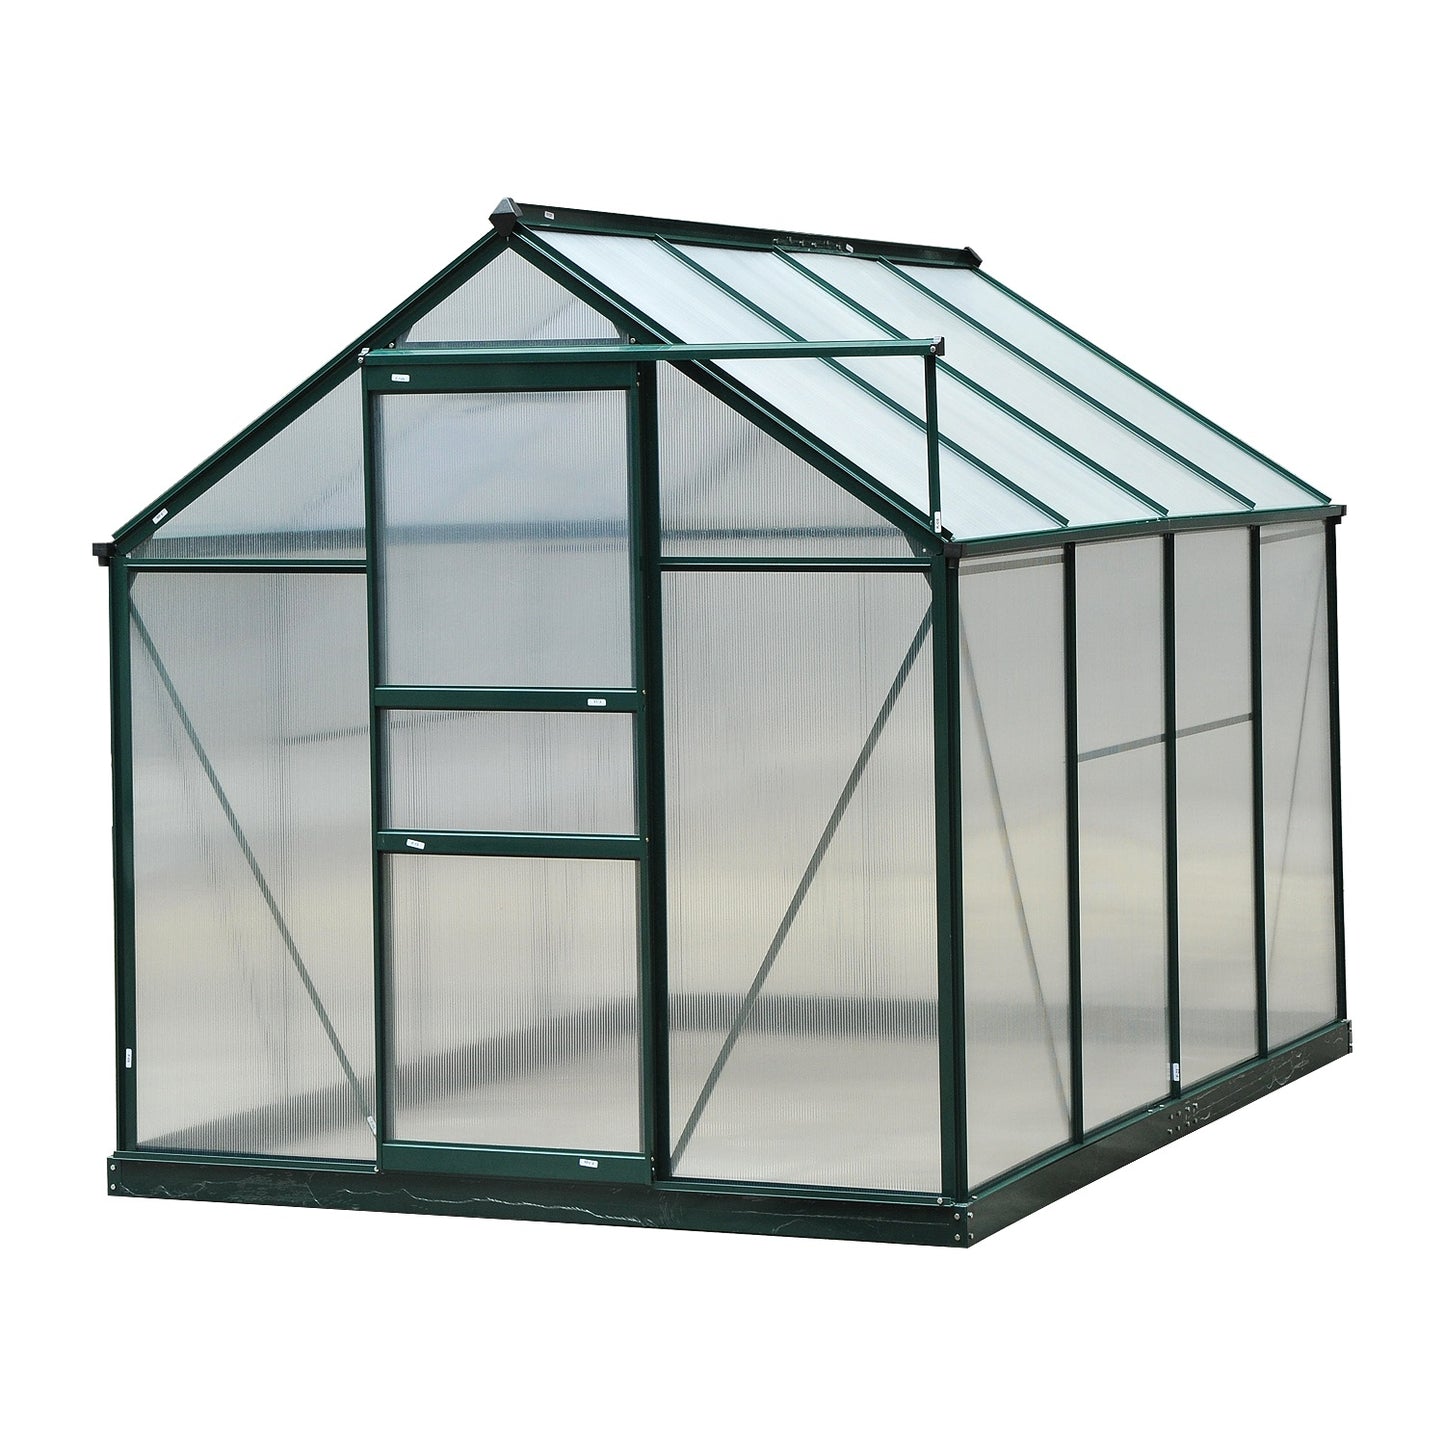 Outsunny Portable Walk-In Greenhouse, 190Lx252Wx201H cm, Aluminum-Dark Green Frame